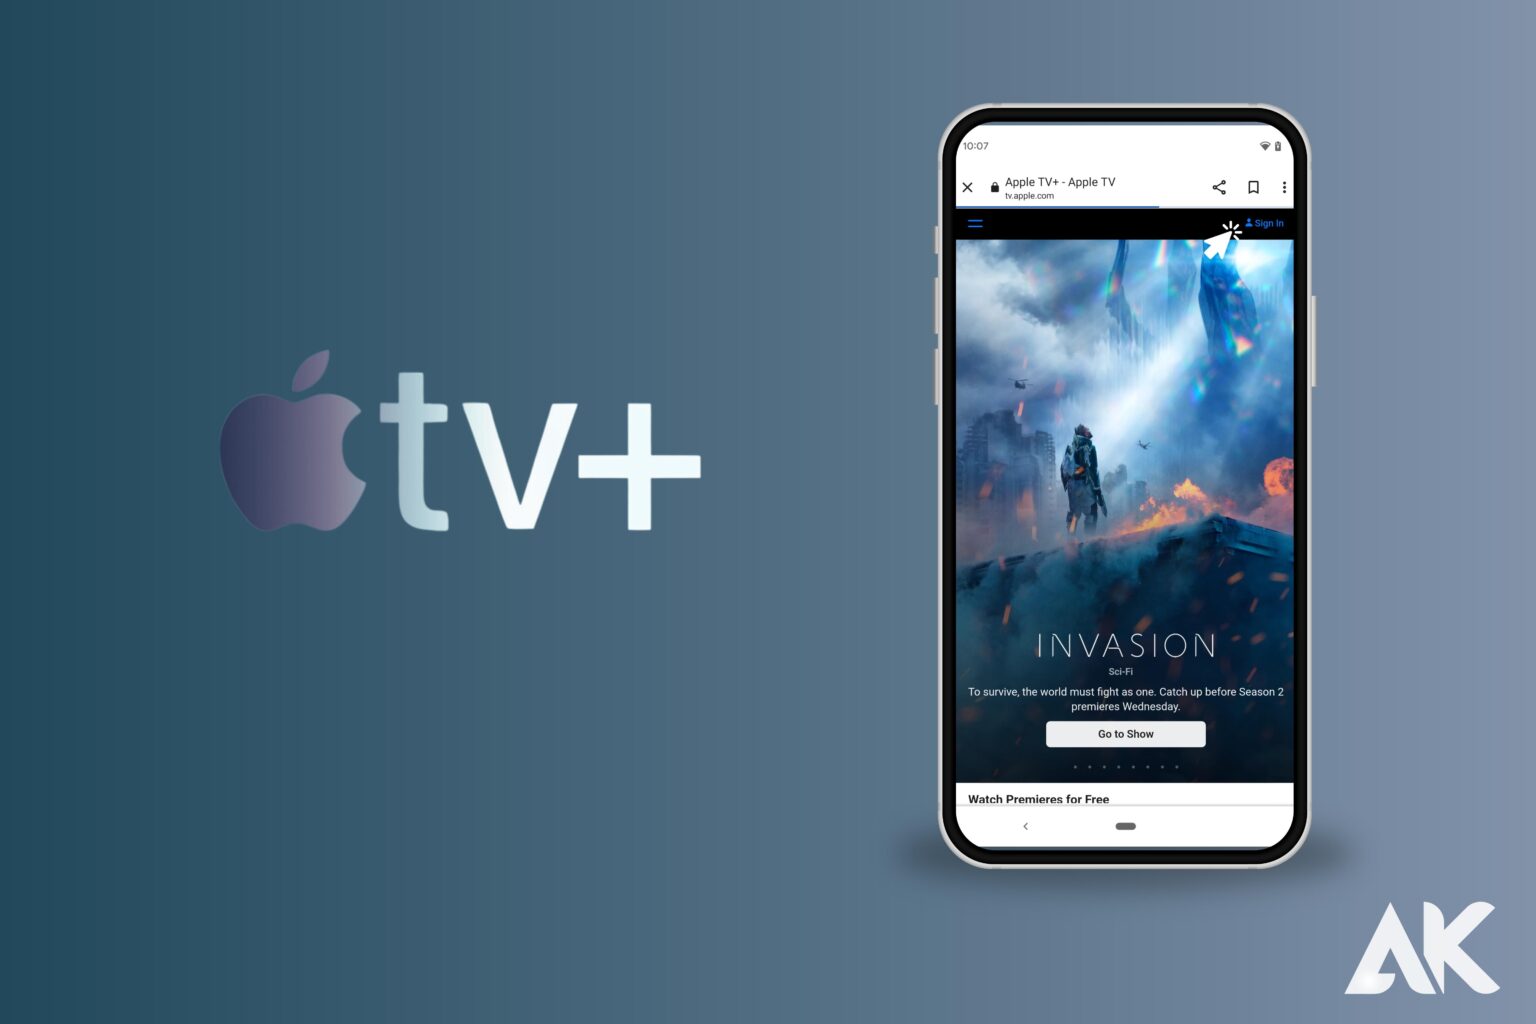 How to sign up for Apple TV+ without an Apple device 2023